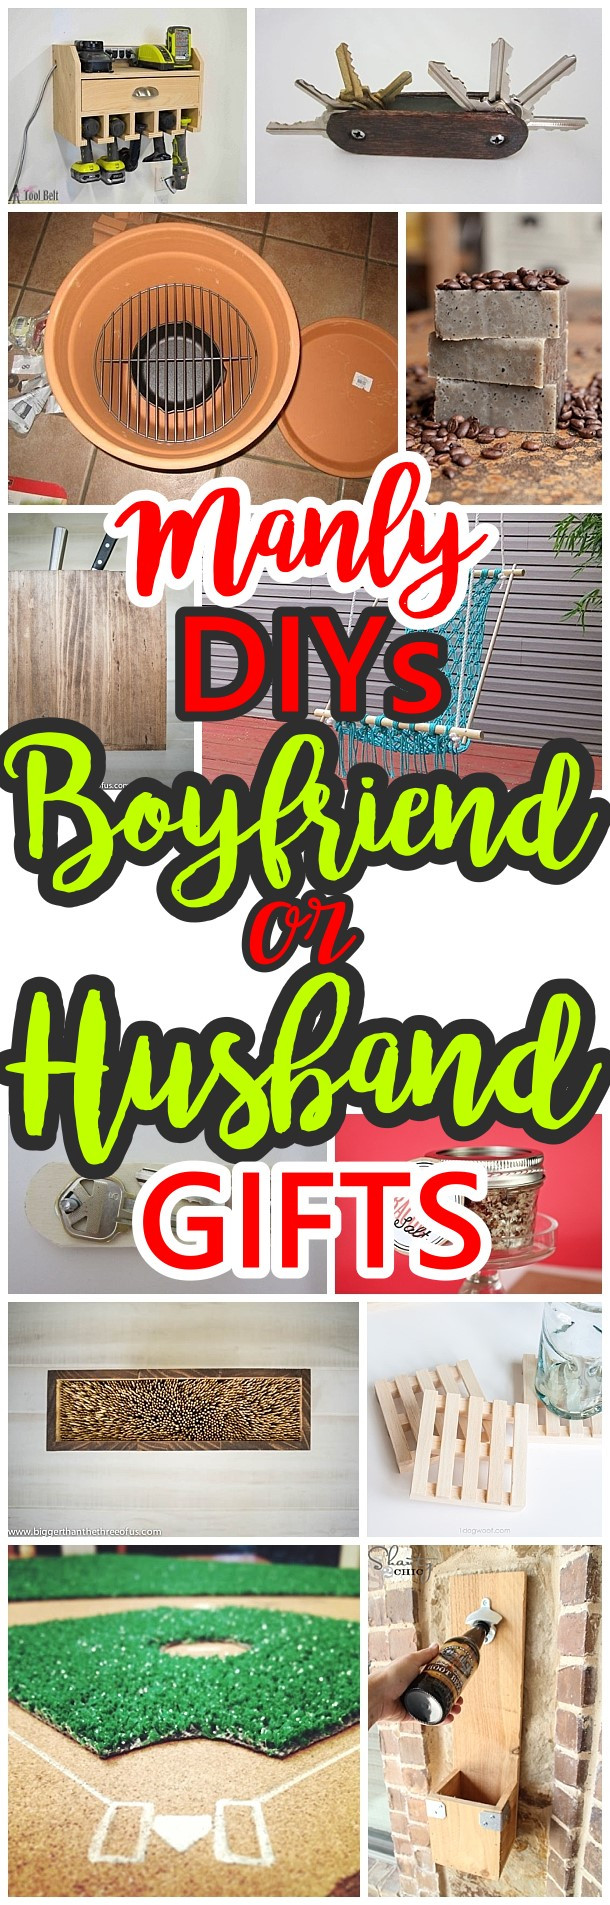 DIY Gifts For Husbands
 Manly Do It Yourself Boyfriend and Husband Gift Ideas